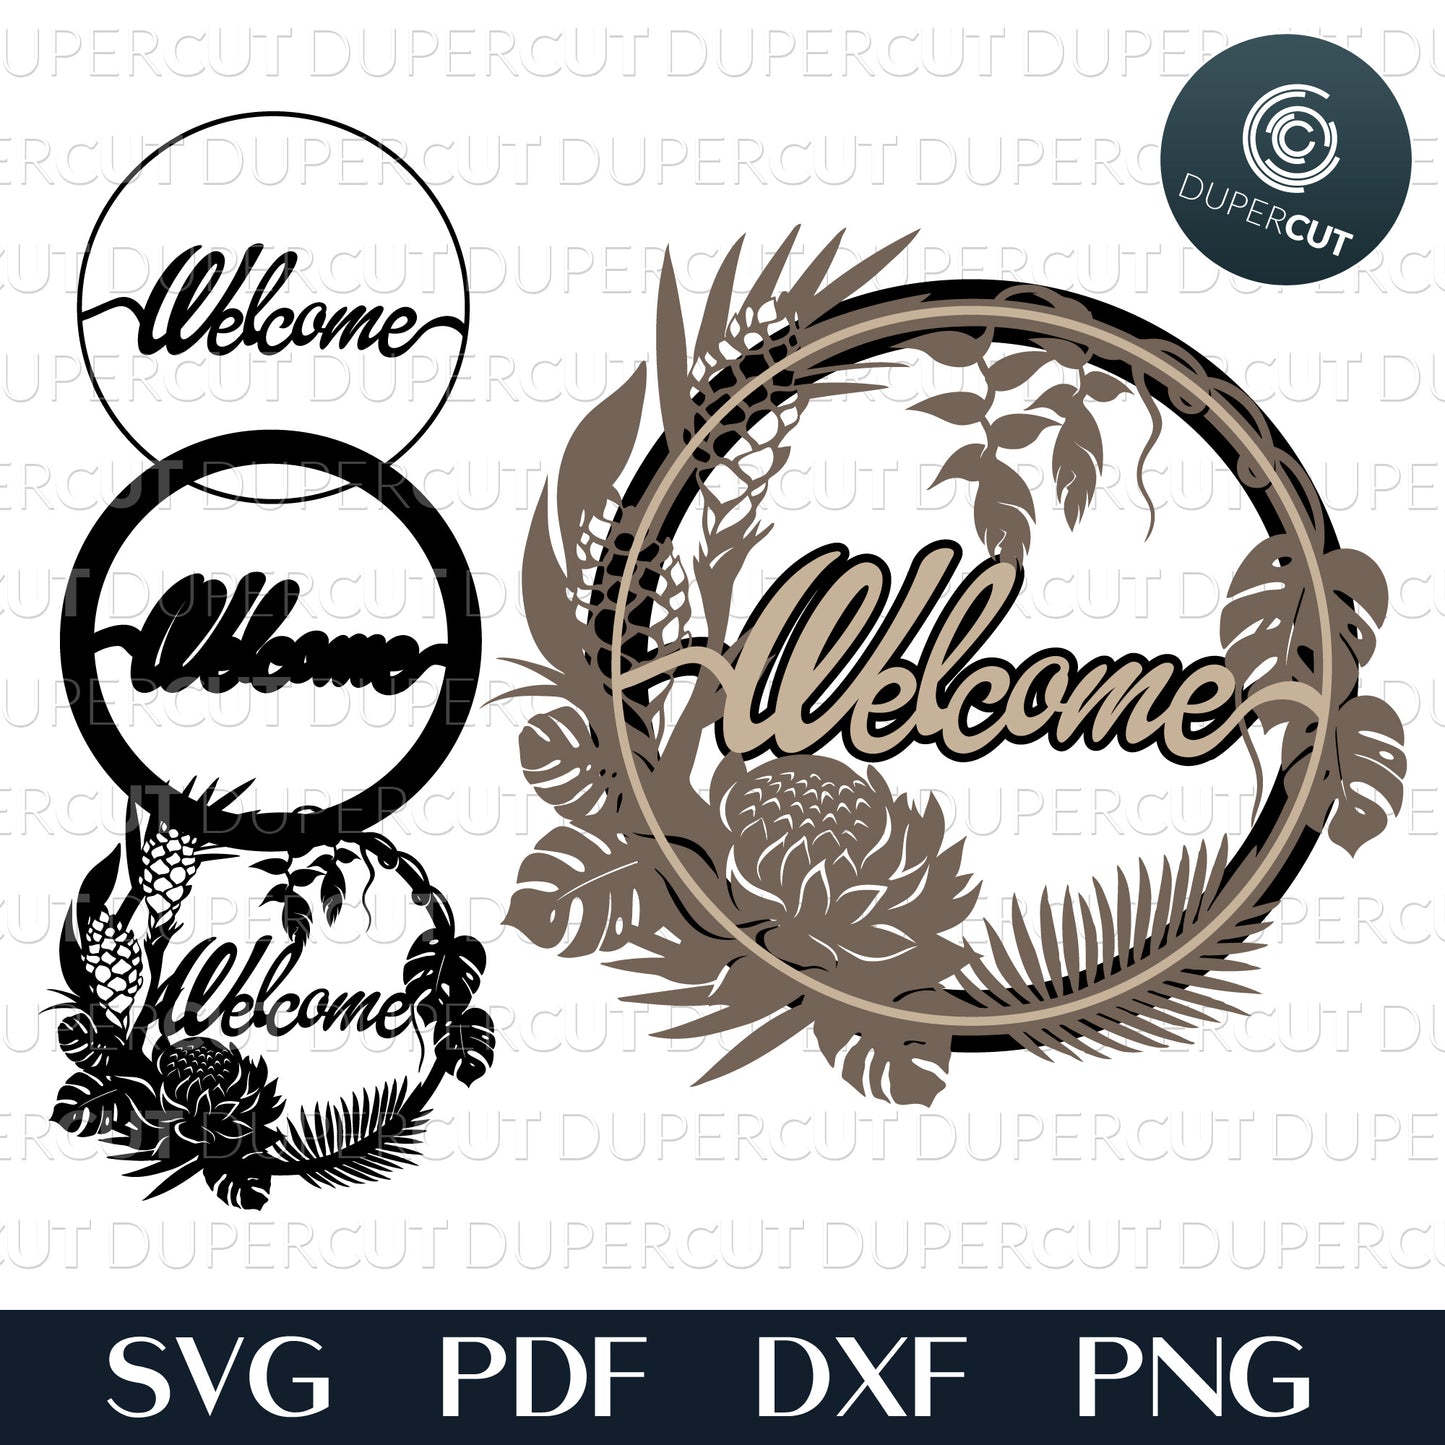 Tropical leaves welcome sign - layered laser cutting files SVG PDF DXF templates for commercial use. Glowforge, Cricut, Silhouette Cameo, CNC plasma machines